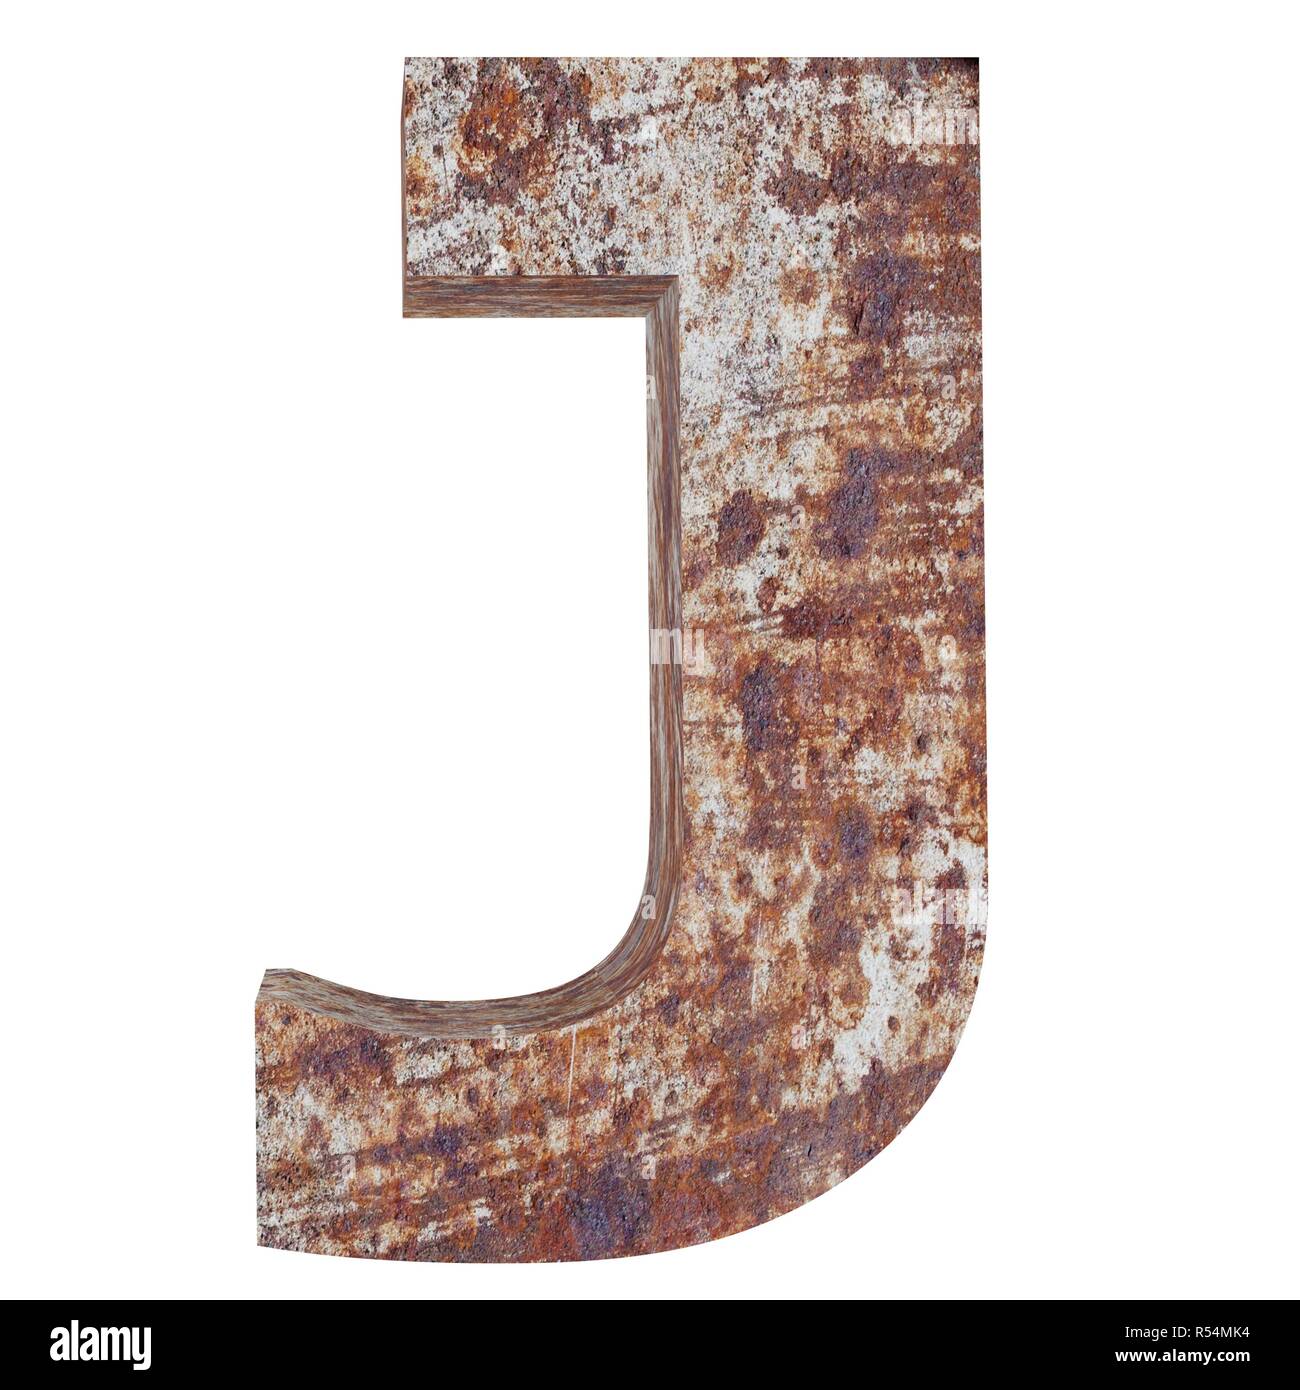 Conceptual old rusted meta capital letter -J, iron or steel industry piece isolated white background. Educative rusty material, aged vintage surface,  Stock Photo